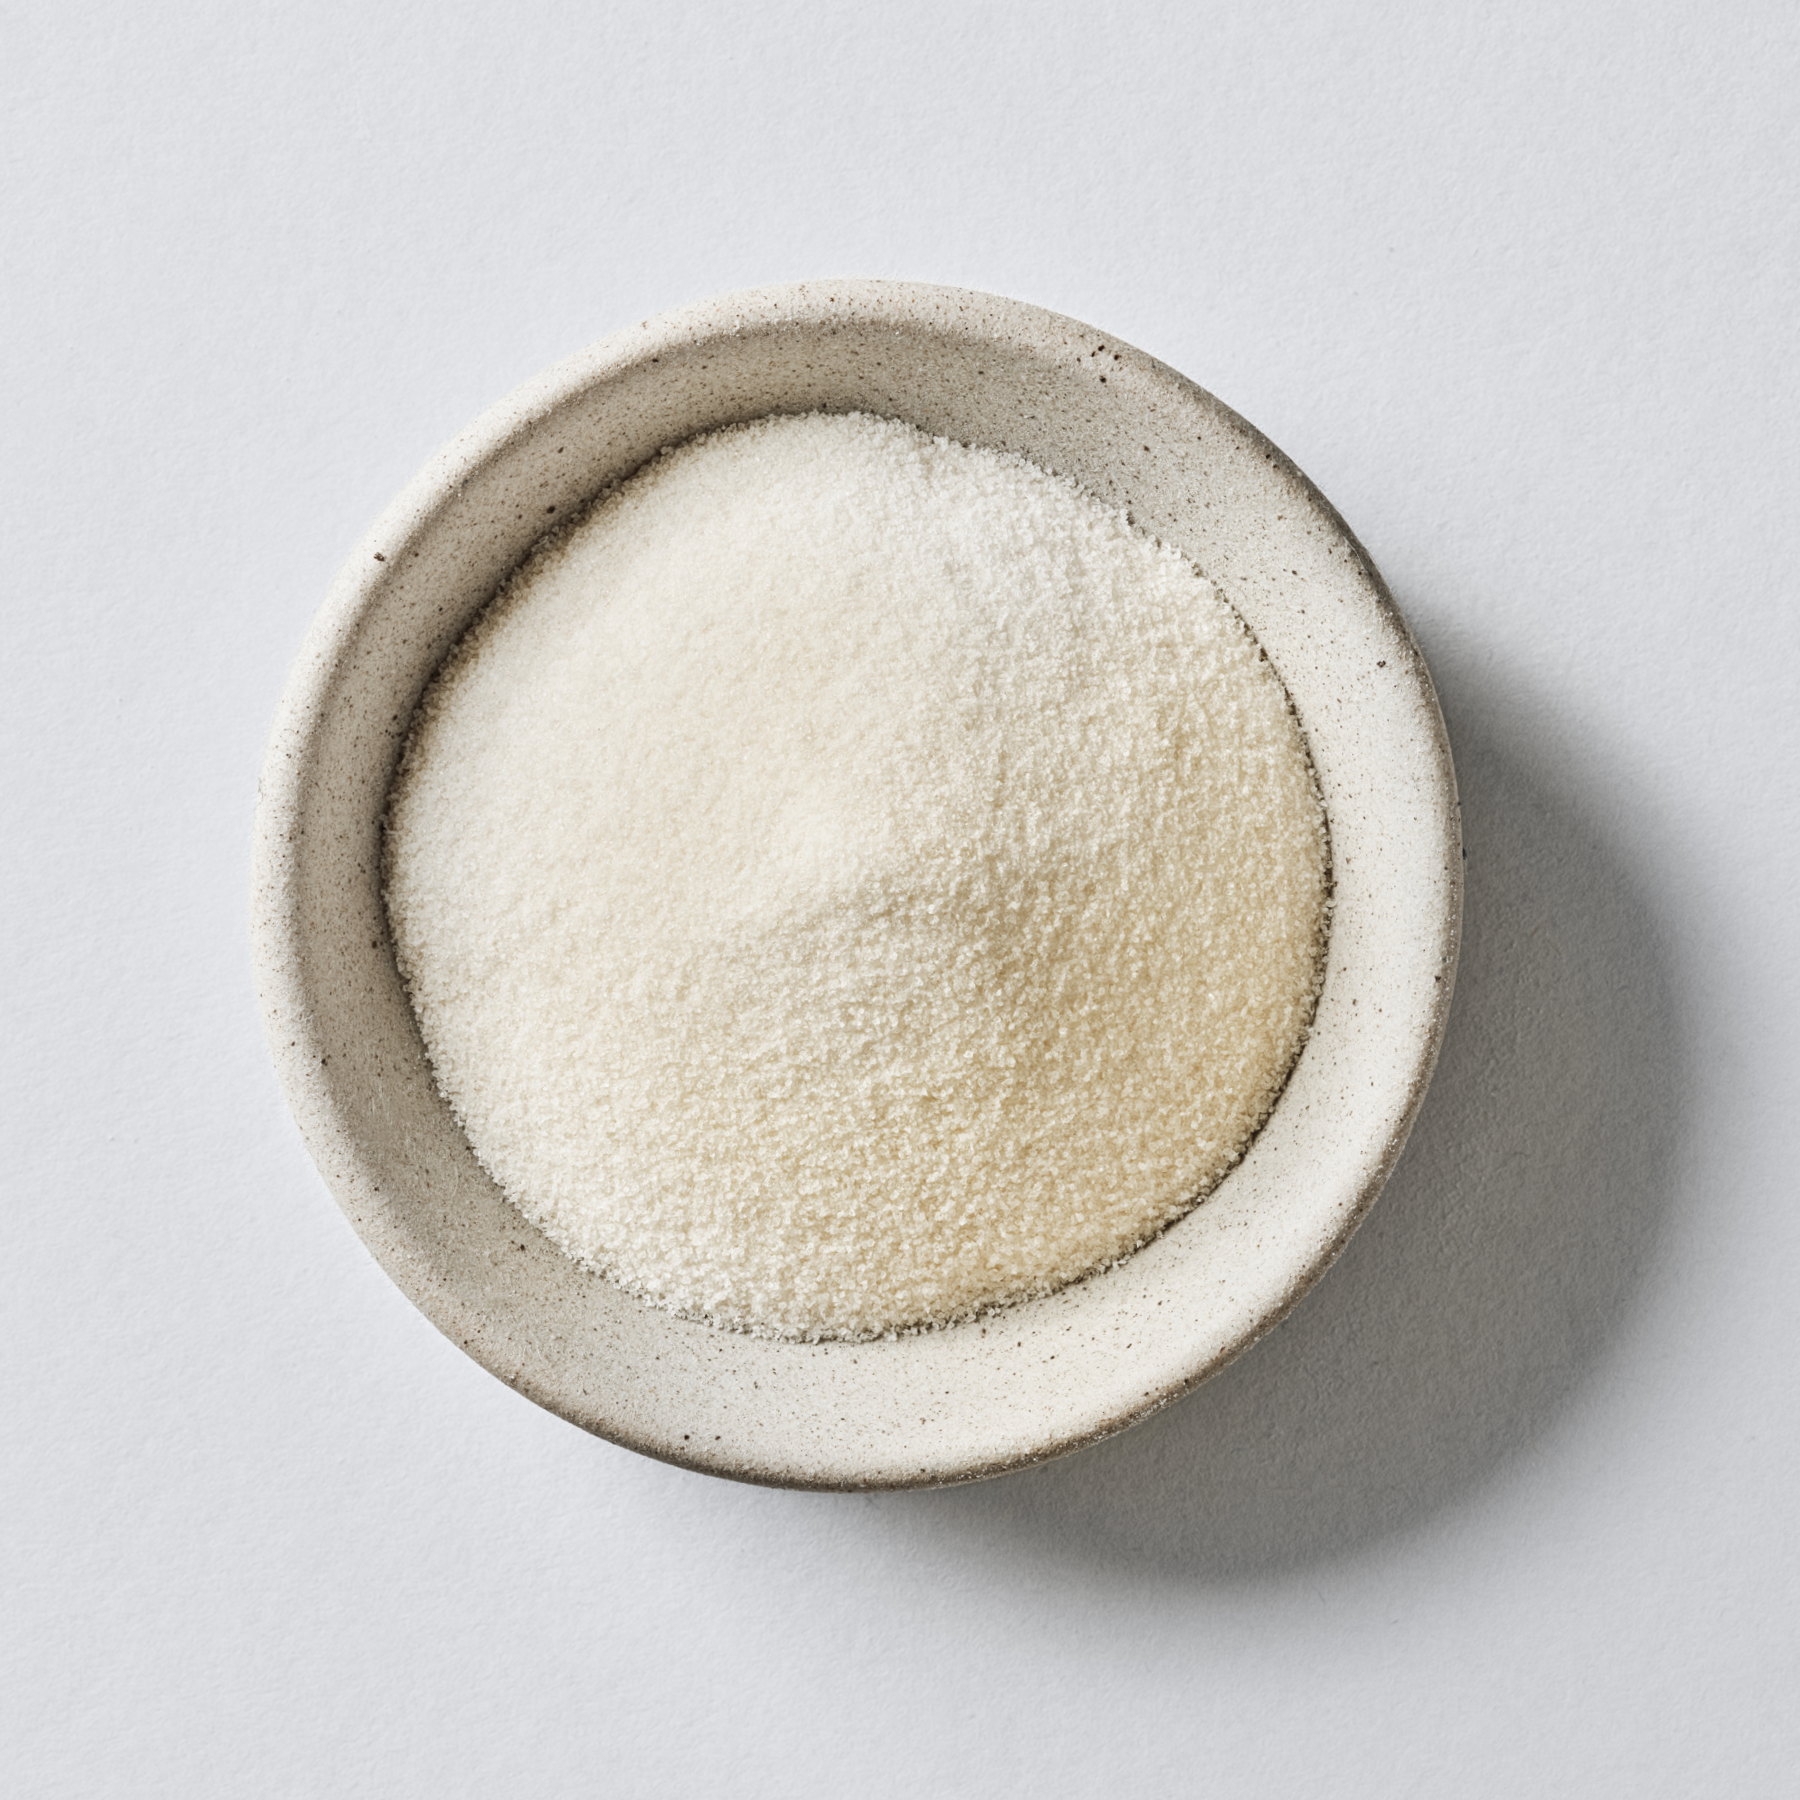 Sports Research Gelatin Powder in a small bowl.